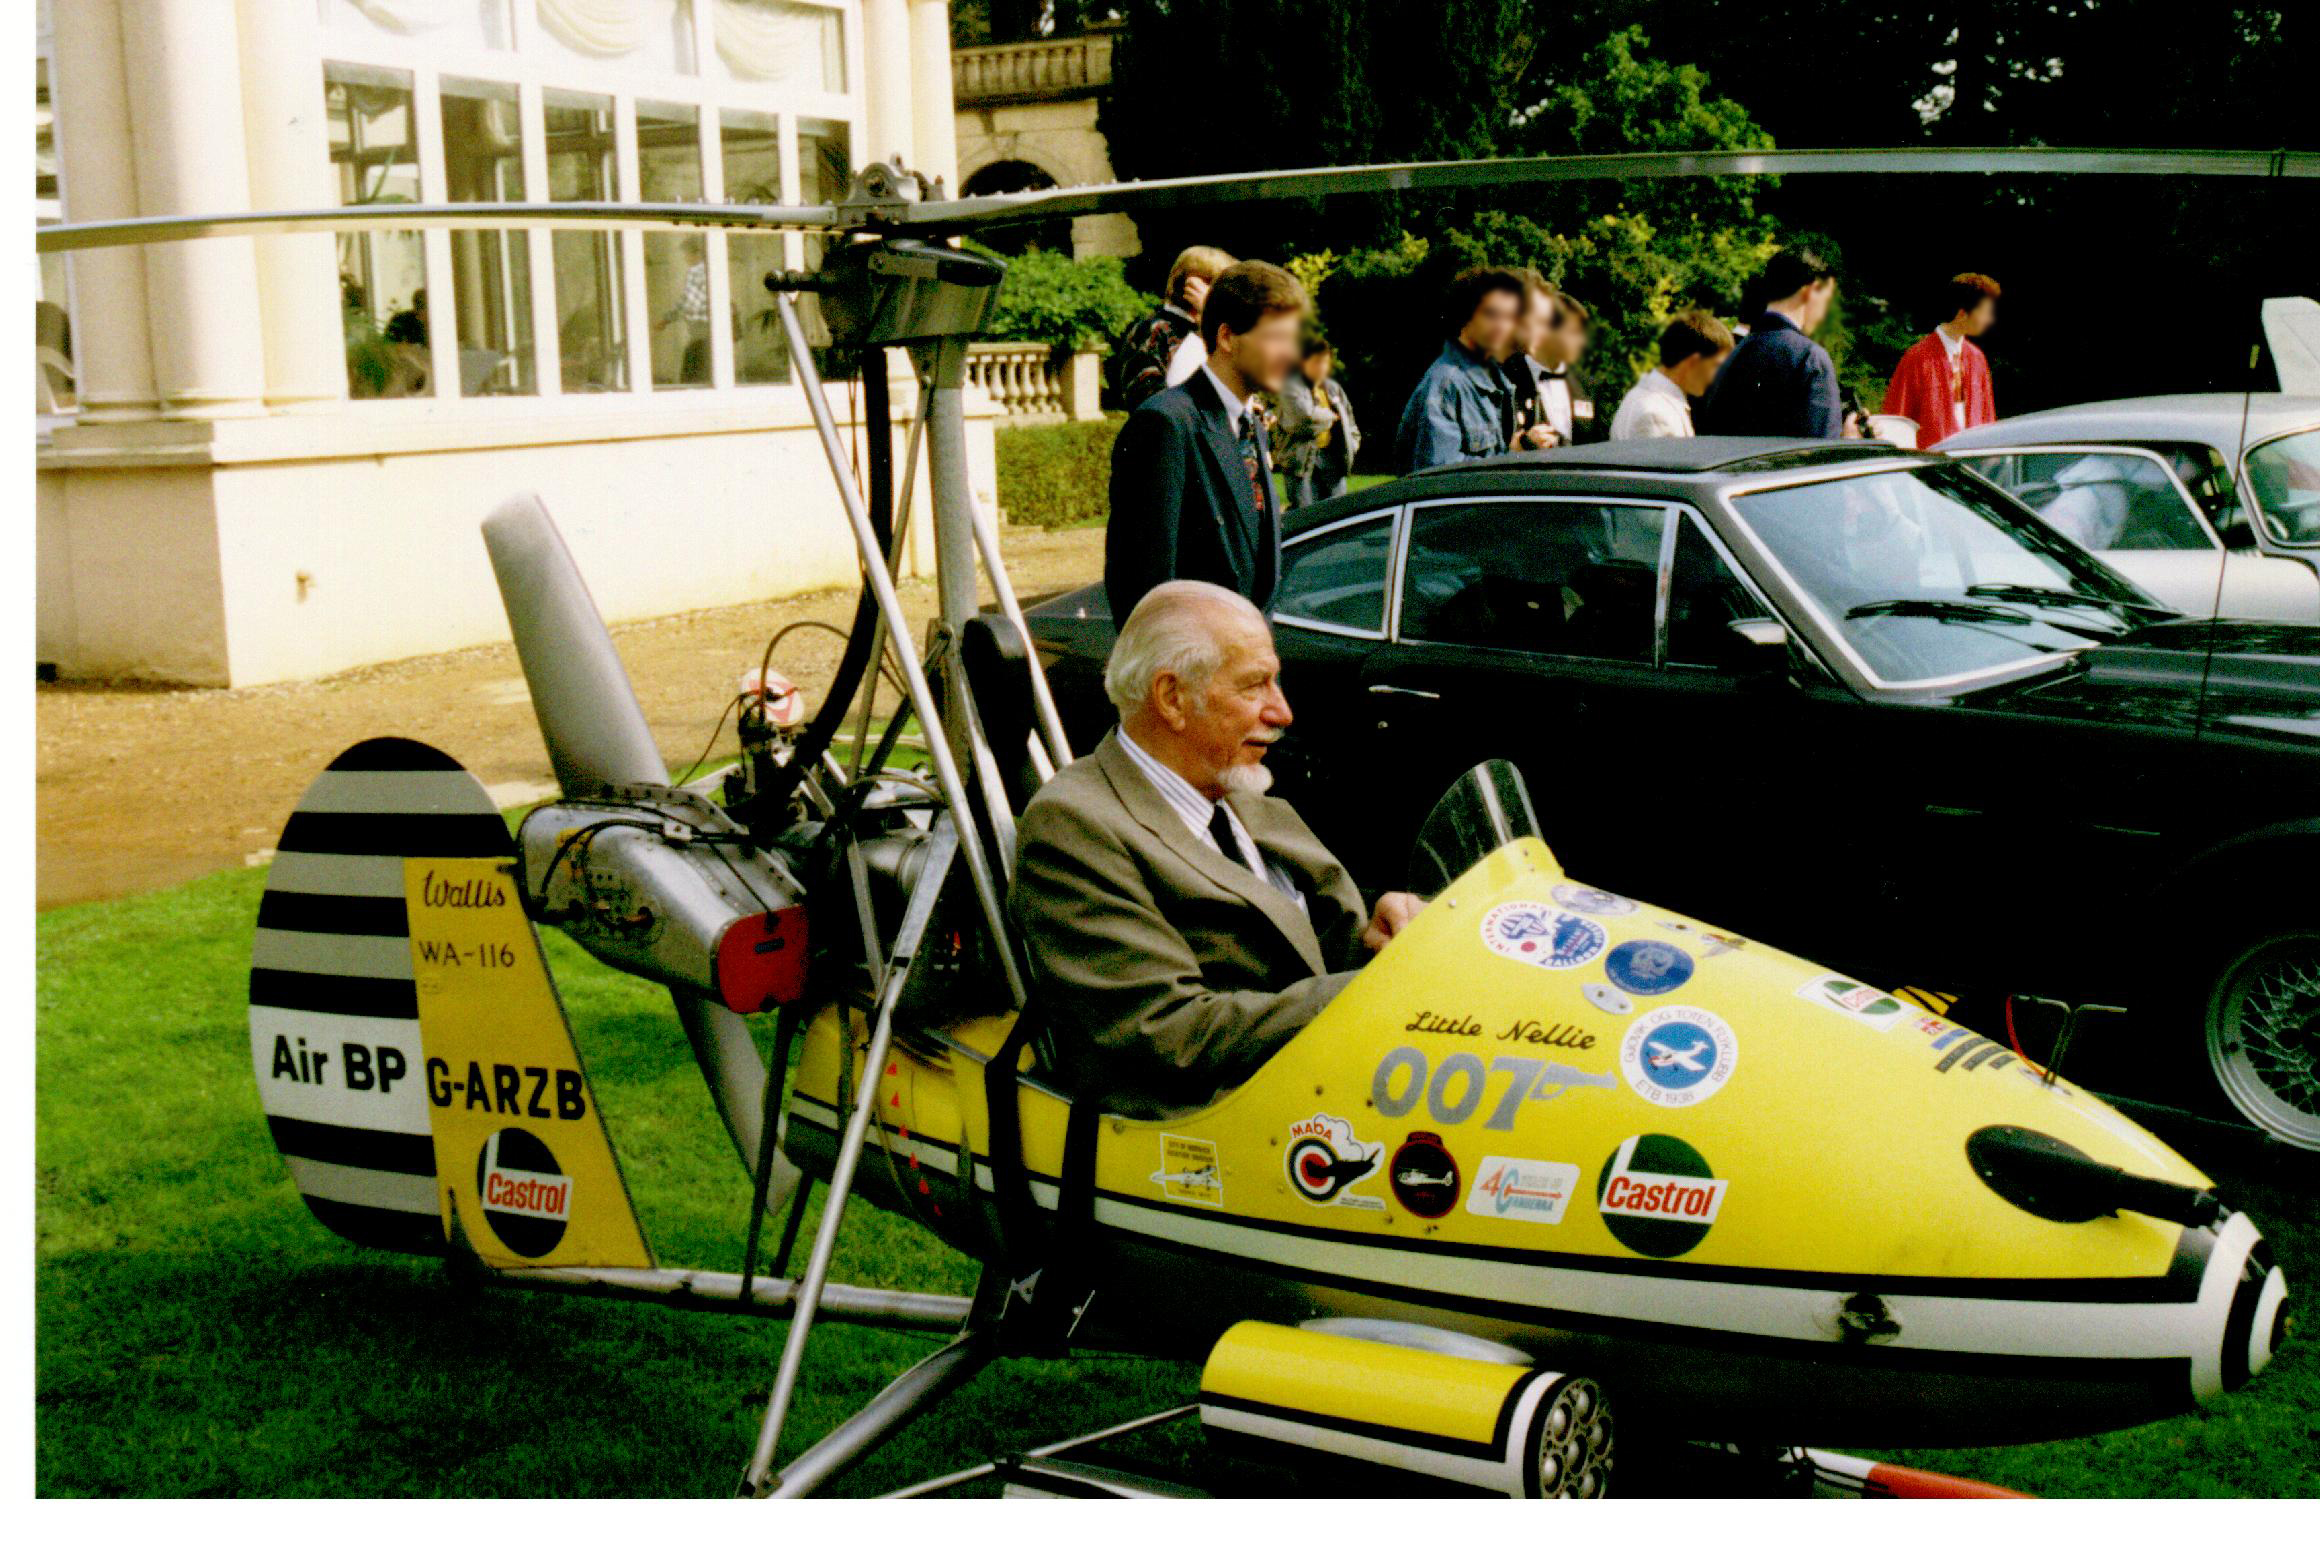 Ken Wallis pictured in the Little Nellie Autogyro, which appeared in the James Bond movie You only live twice 